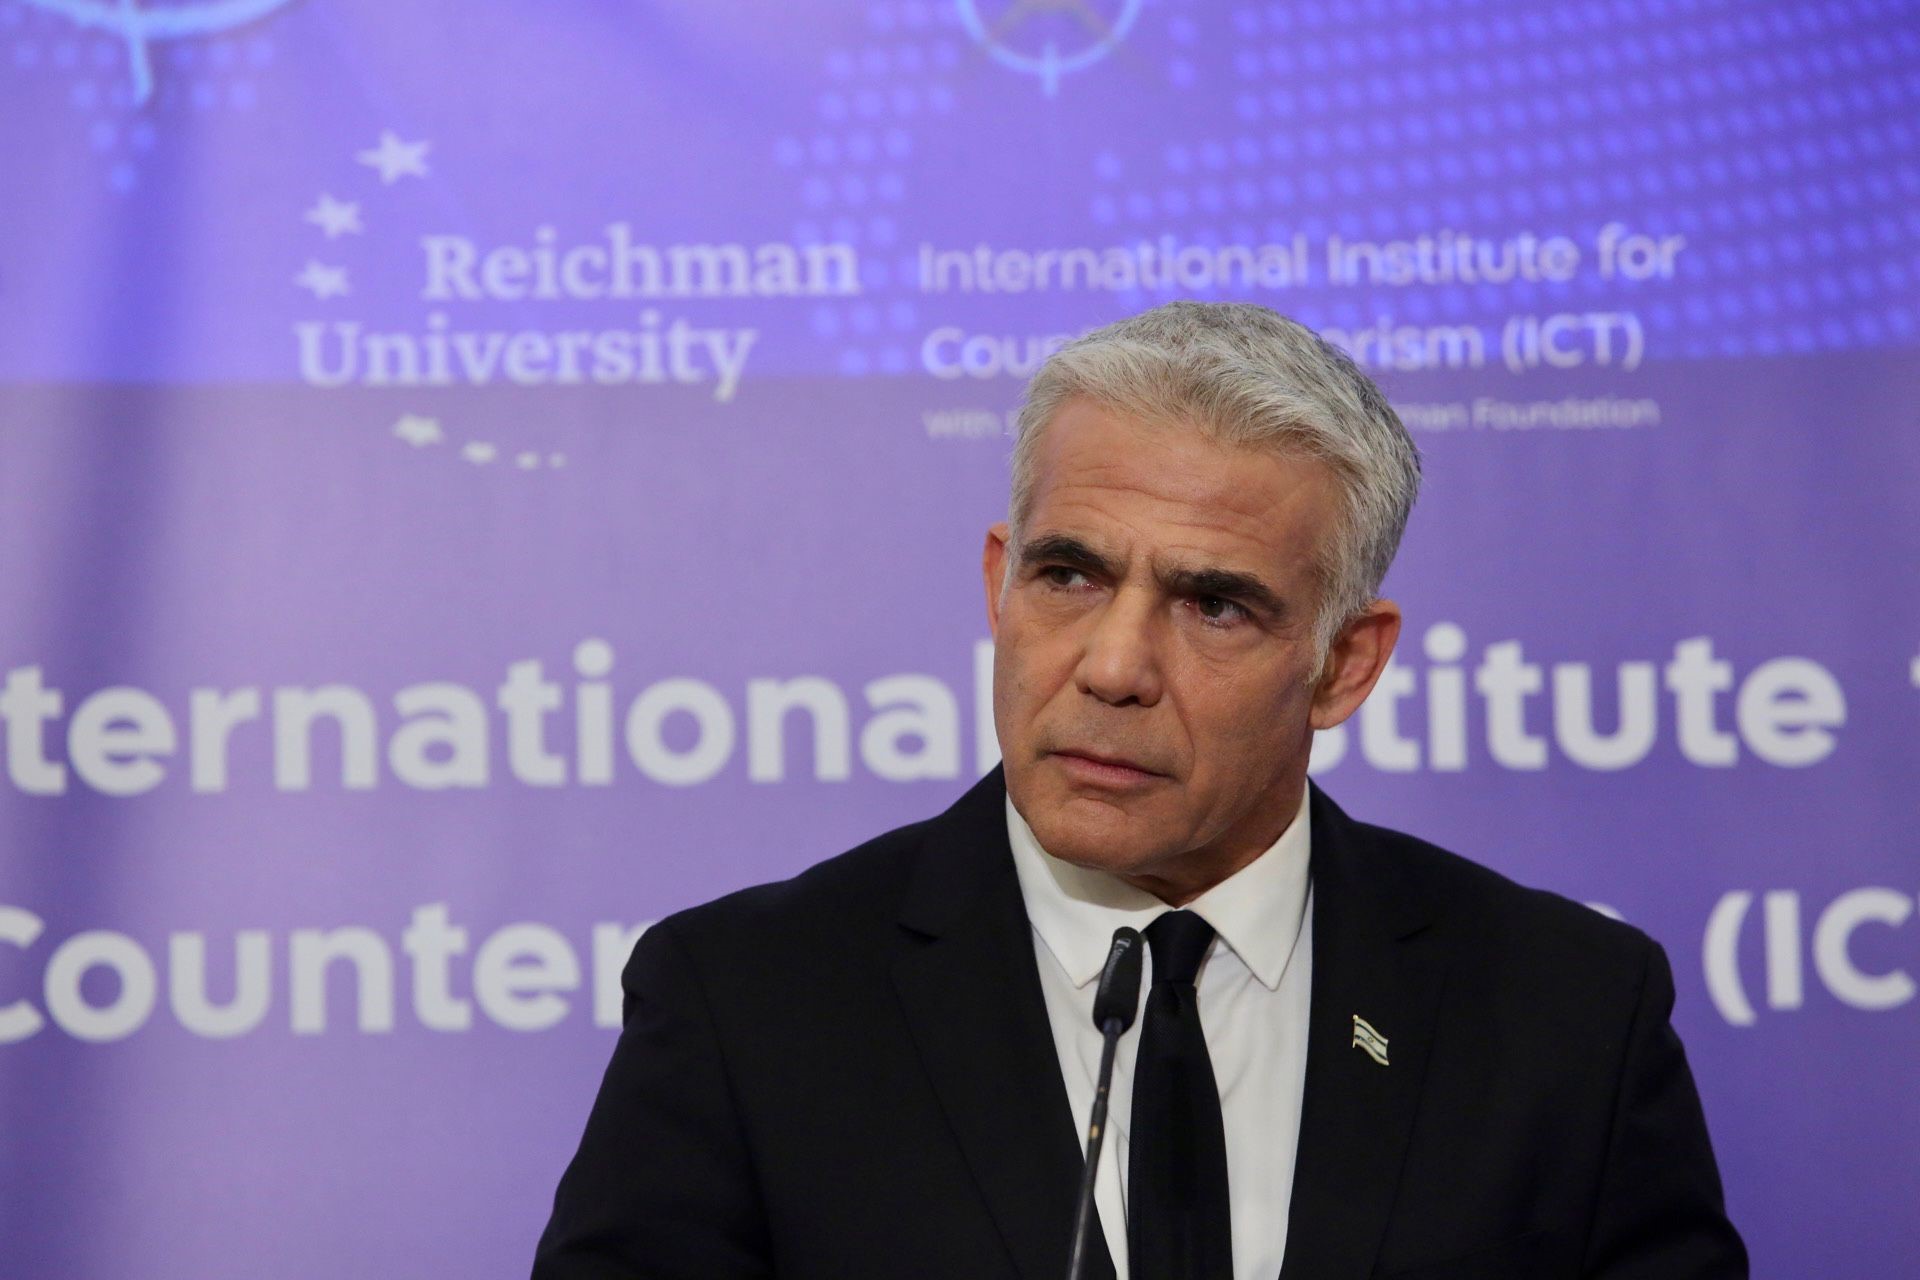 Lapid: Best option for post-Hamas Gaza is a return to Palestinian